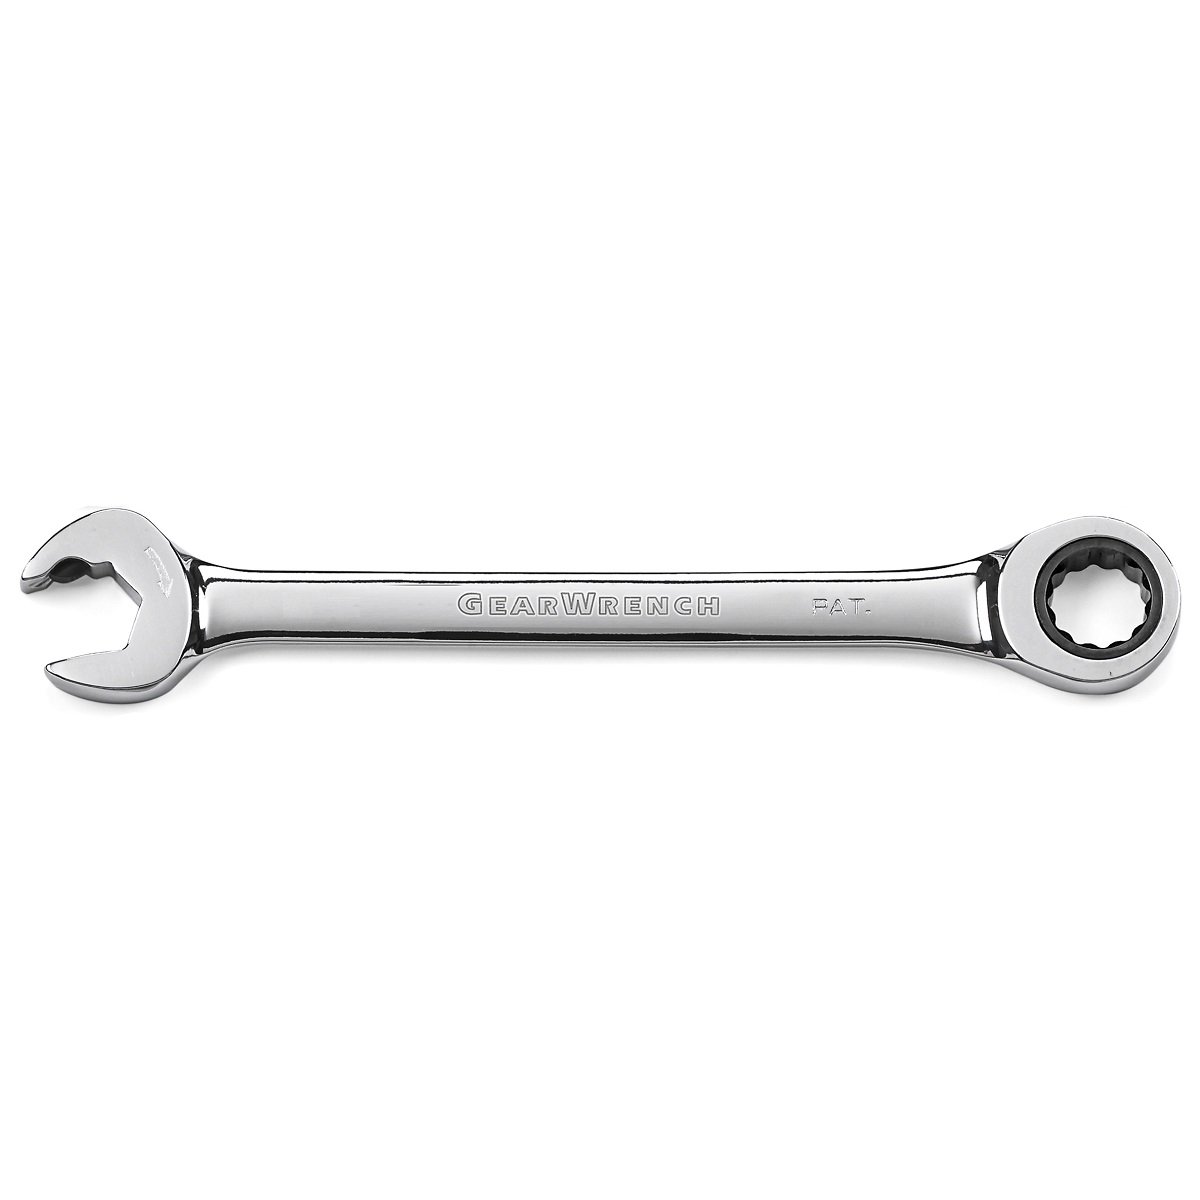 GearWrench Ratcheting Open End Combination Spanner Wrench 9mm 85509